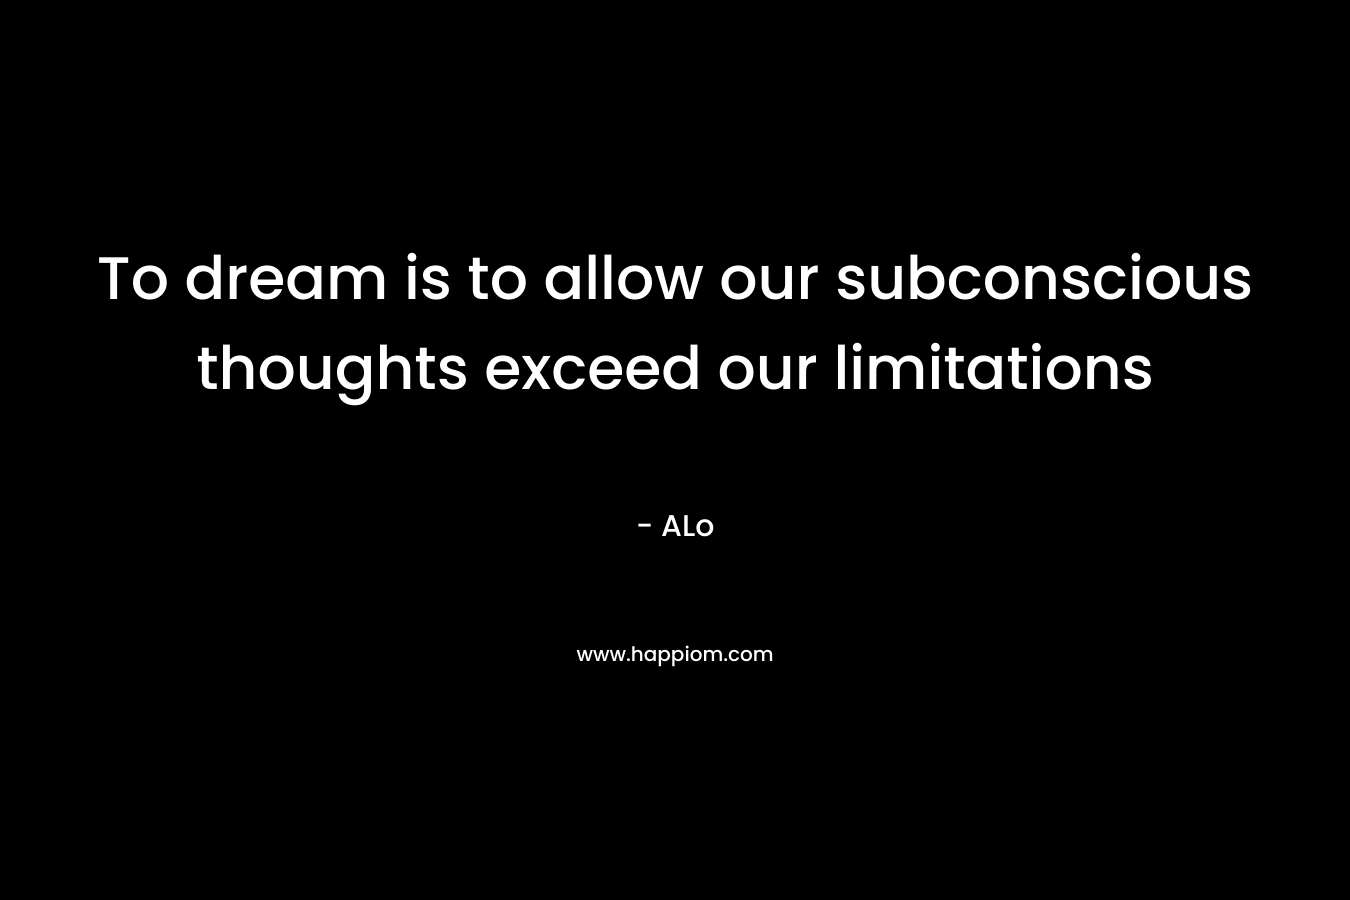 To dream is to allow our subconscious thoughts exceed our limitations